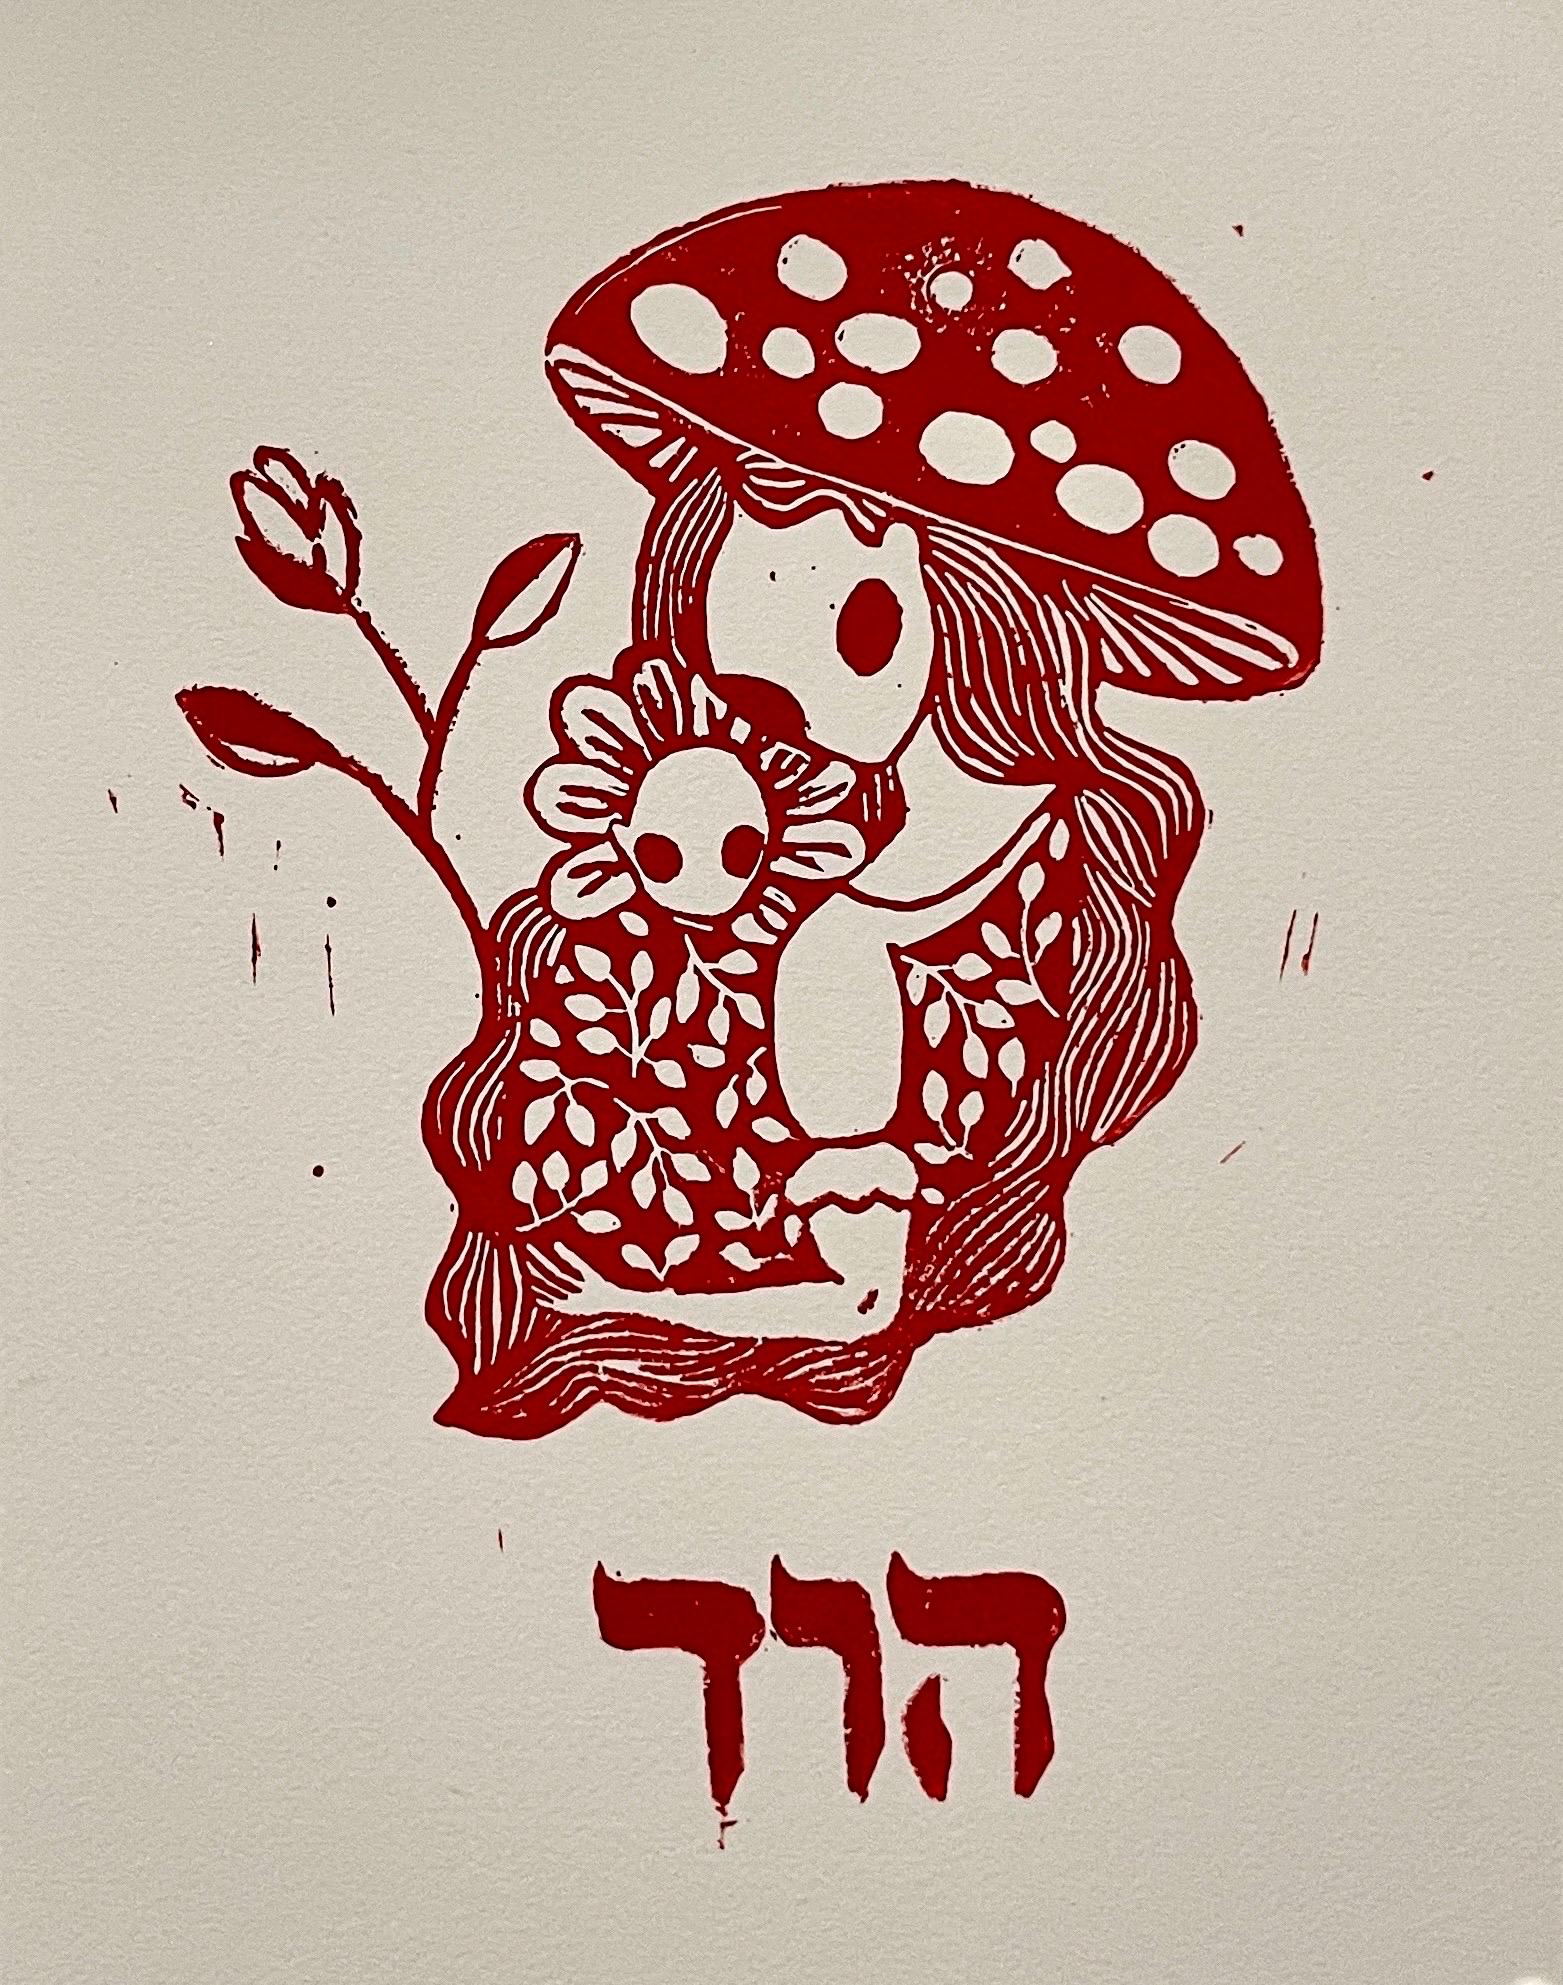 Basya Wuensch
Sefirot, Hod (glory, splendor)
Mother & Baby, Flowers
2023
Hand printed color linocut on cold pressed watercolor paper
Hand signed and numbered
12 X 9 inches

Basya Wuensch Reiter is an accomplished contemporary female Chassidic artist